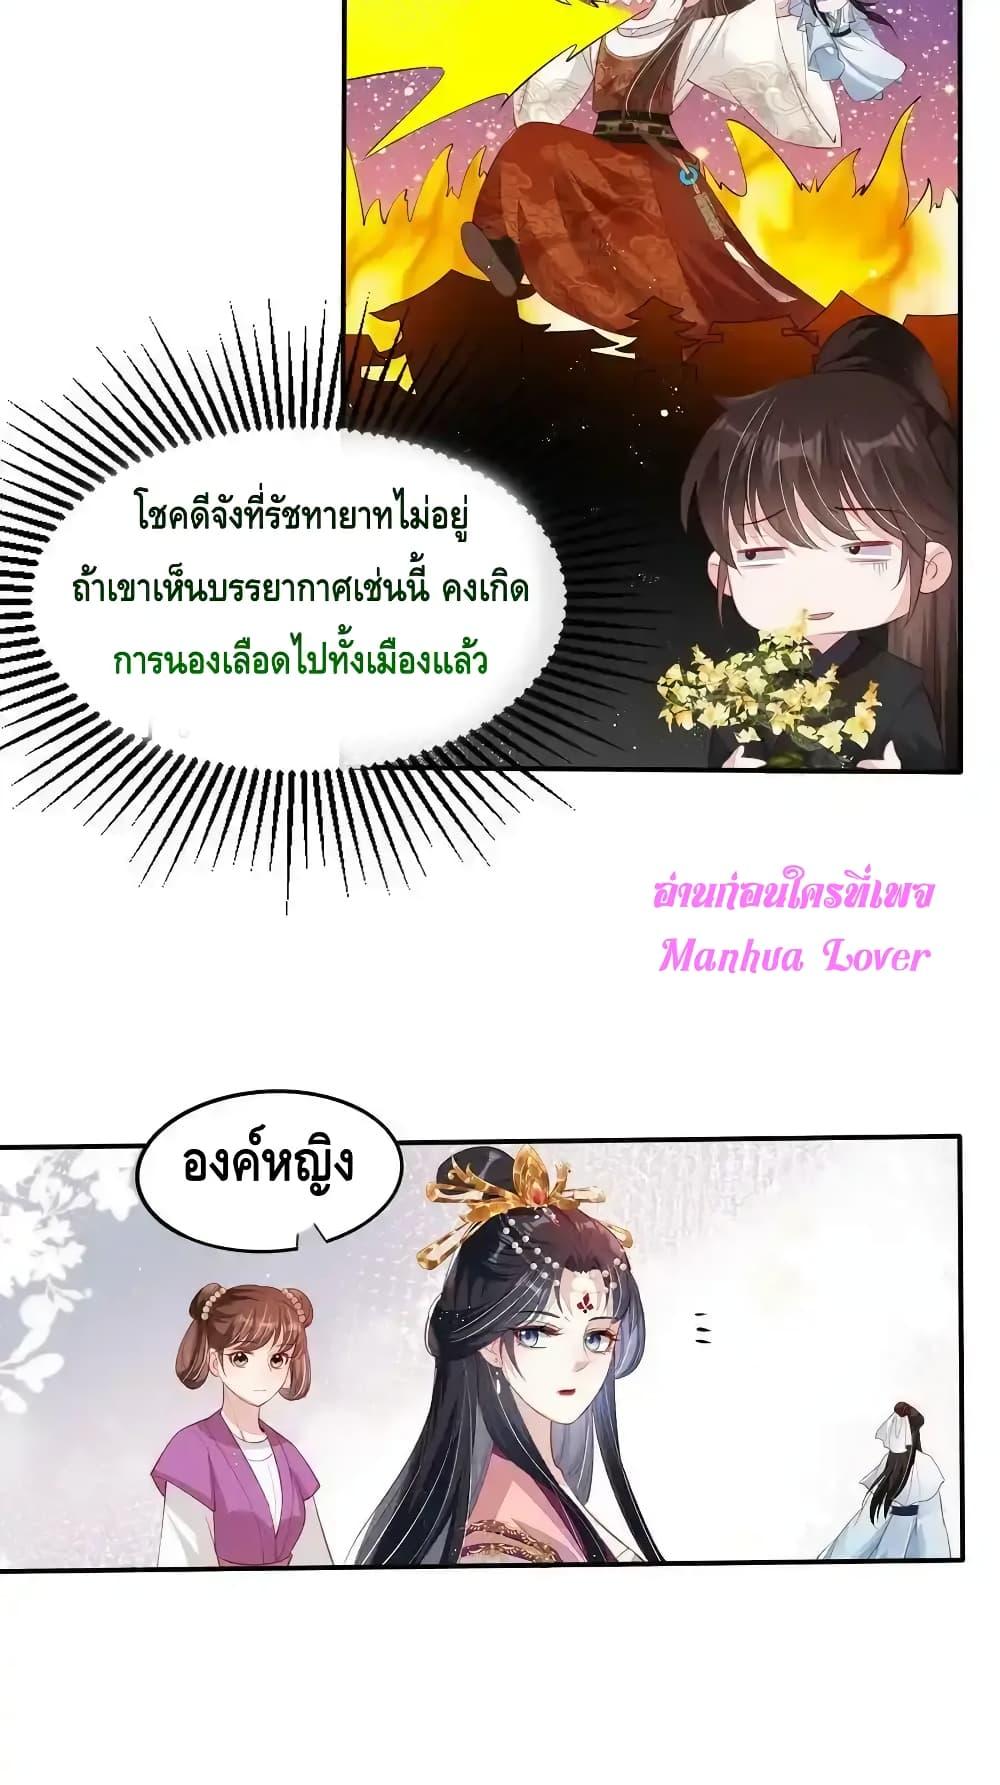 After I Bloom, a Hundred Flowers Will ill – ดอกไม้นับ ตอนที่ 70 (25)